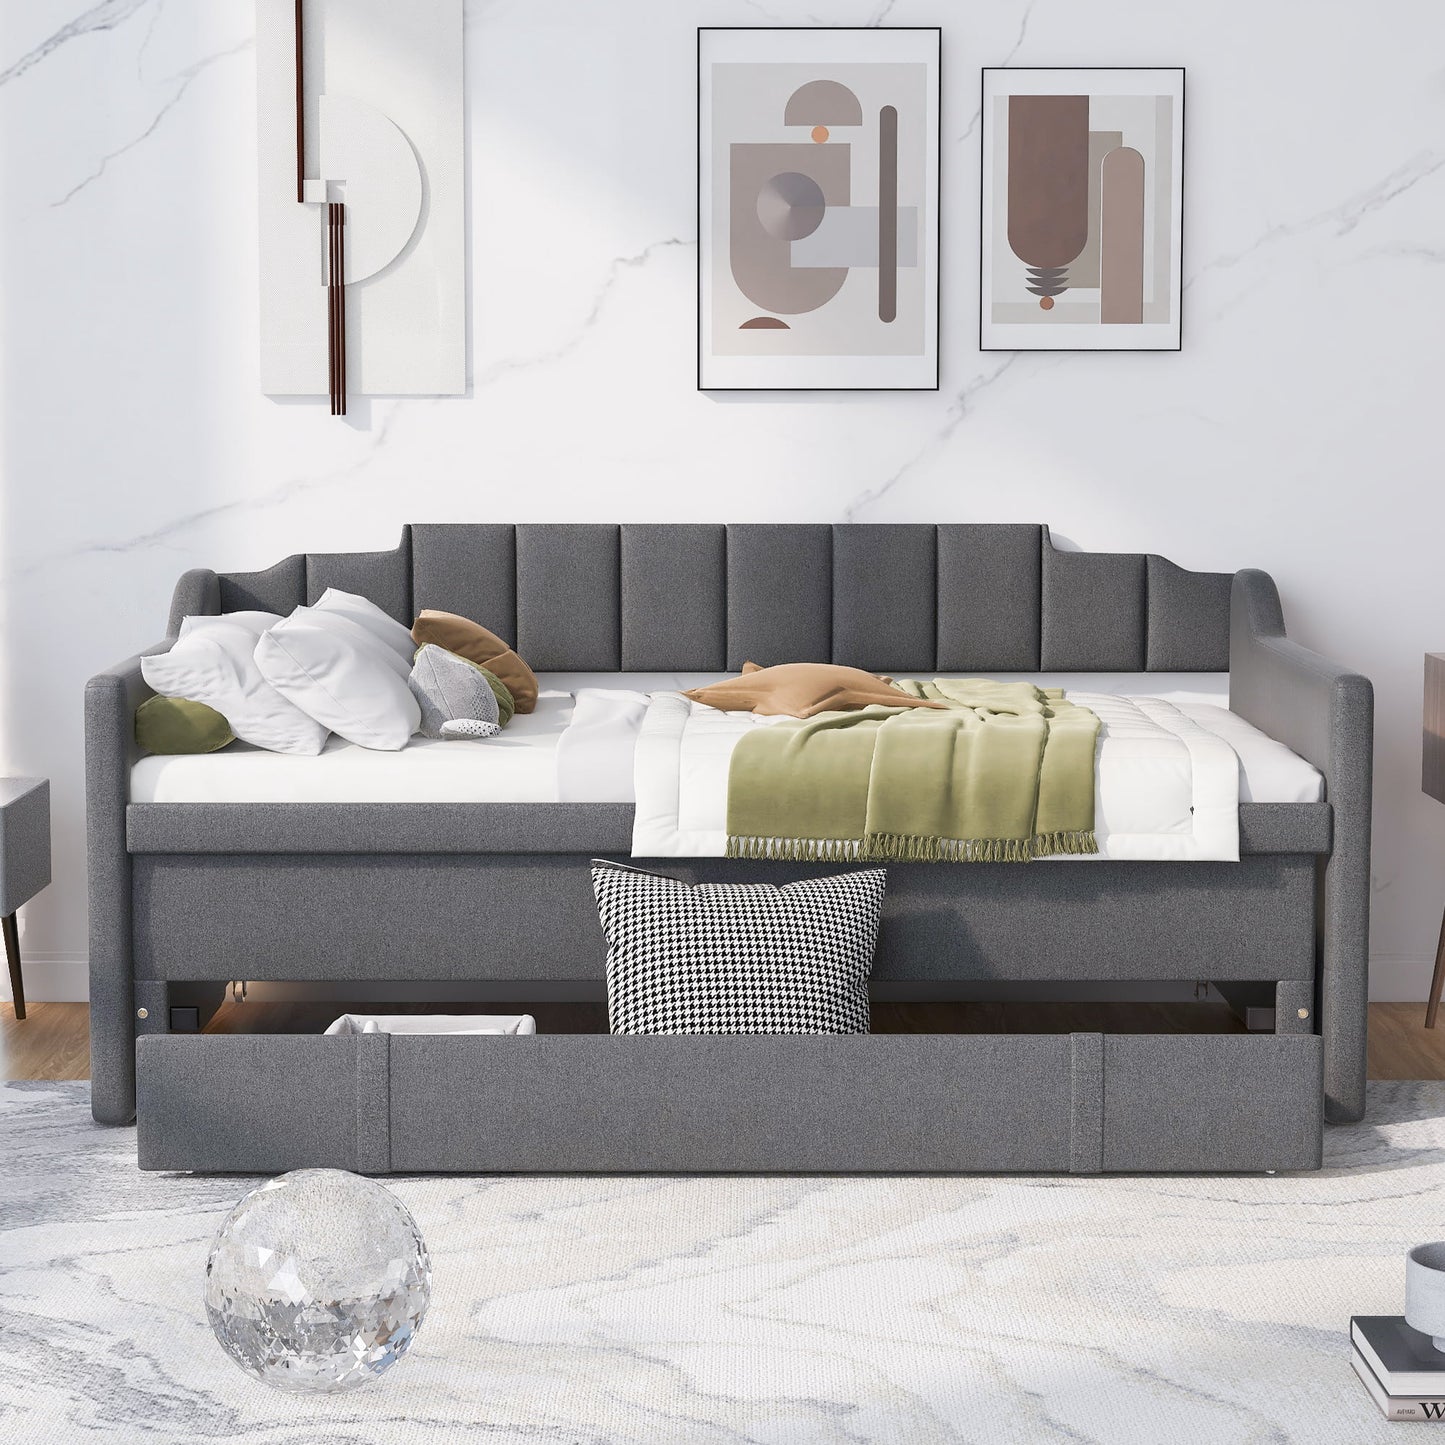 Gewnee Twin Size Upholstery Daybed with Trundle and Drawers for Kids Bedroom, Gray